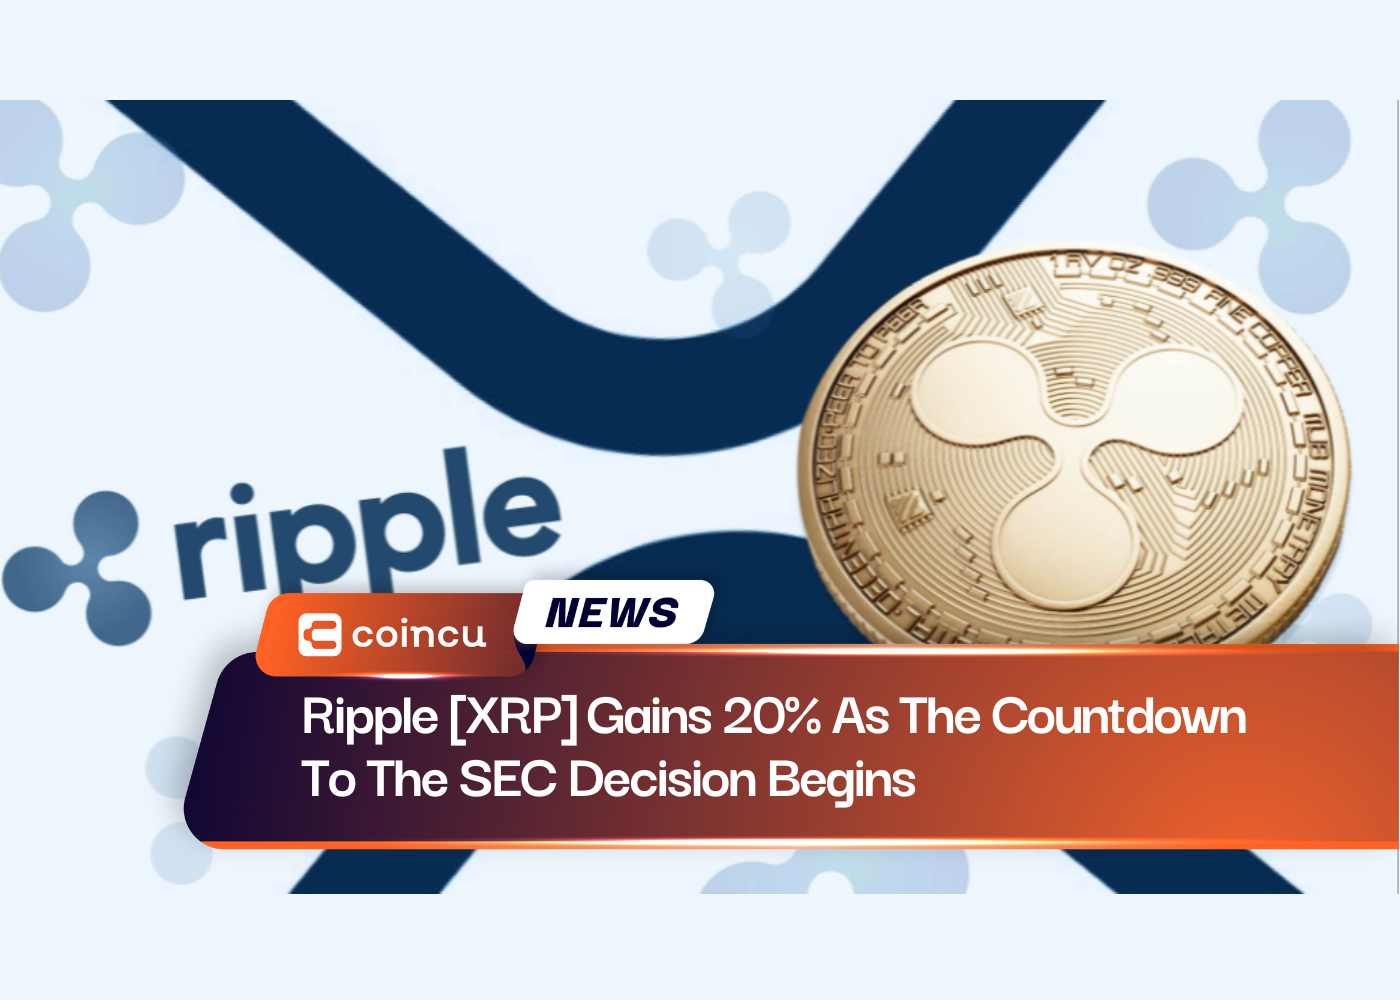 Ripple [XRP] Gains 20% As The Countdown To The SEC Decision Begins